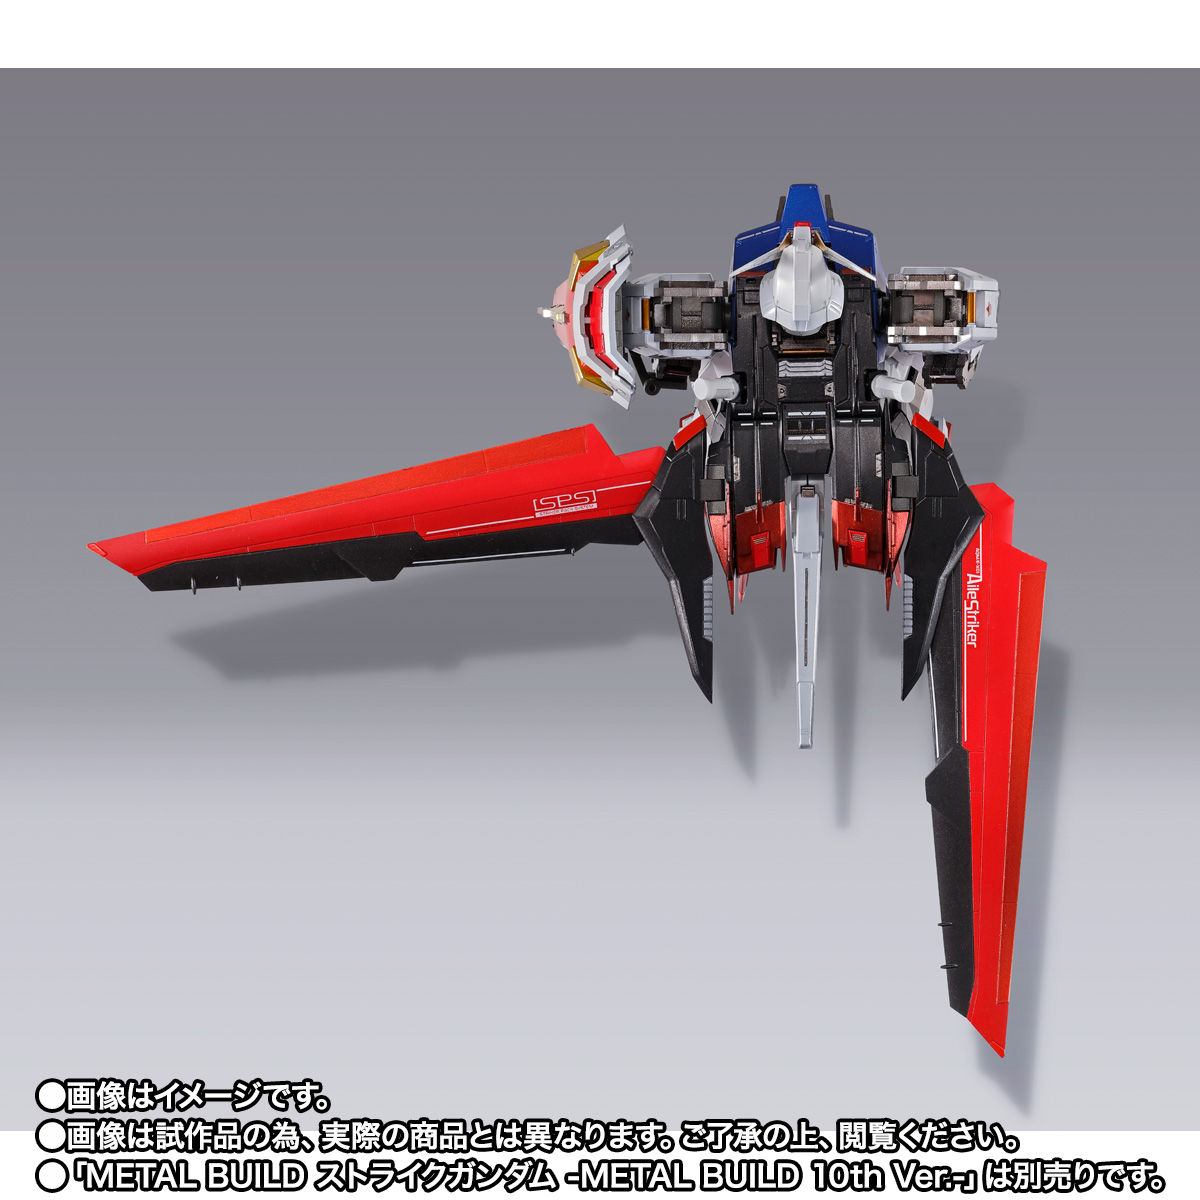 Metal Build AQM/E-X01 Aile Striker for Gundam Seed Series(Metal Build 10th Anniversary Limited Package)